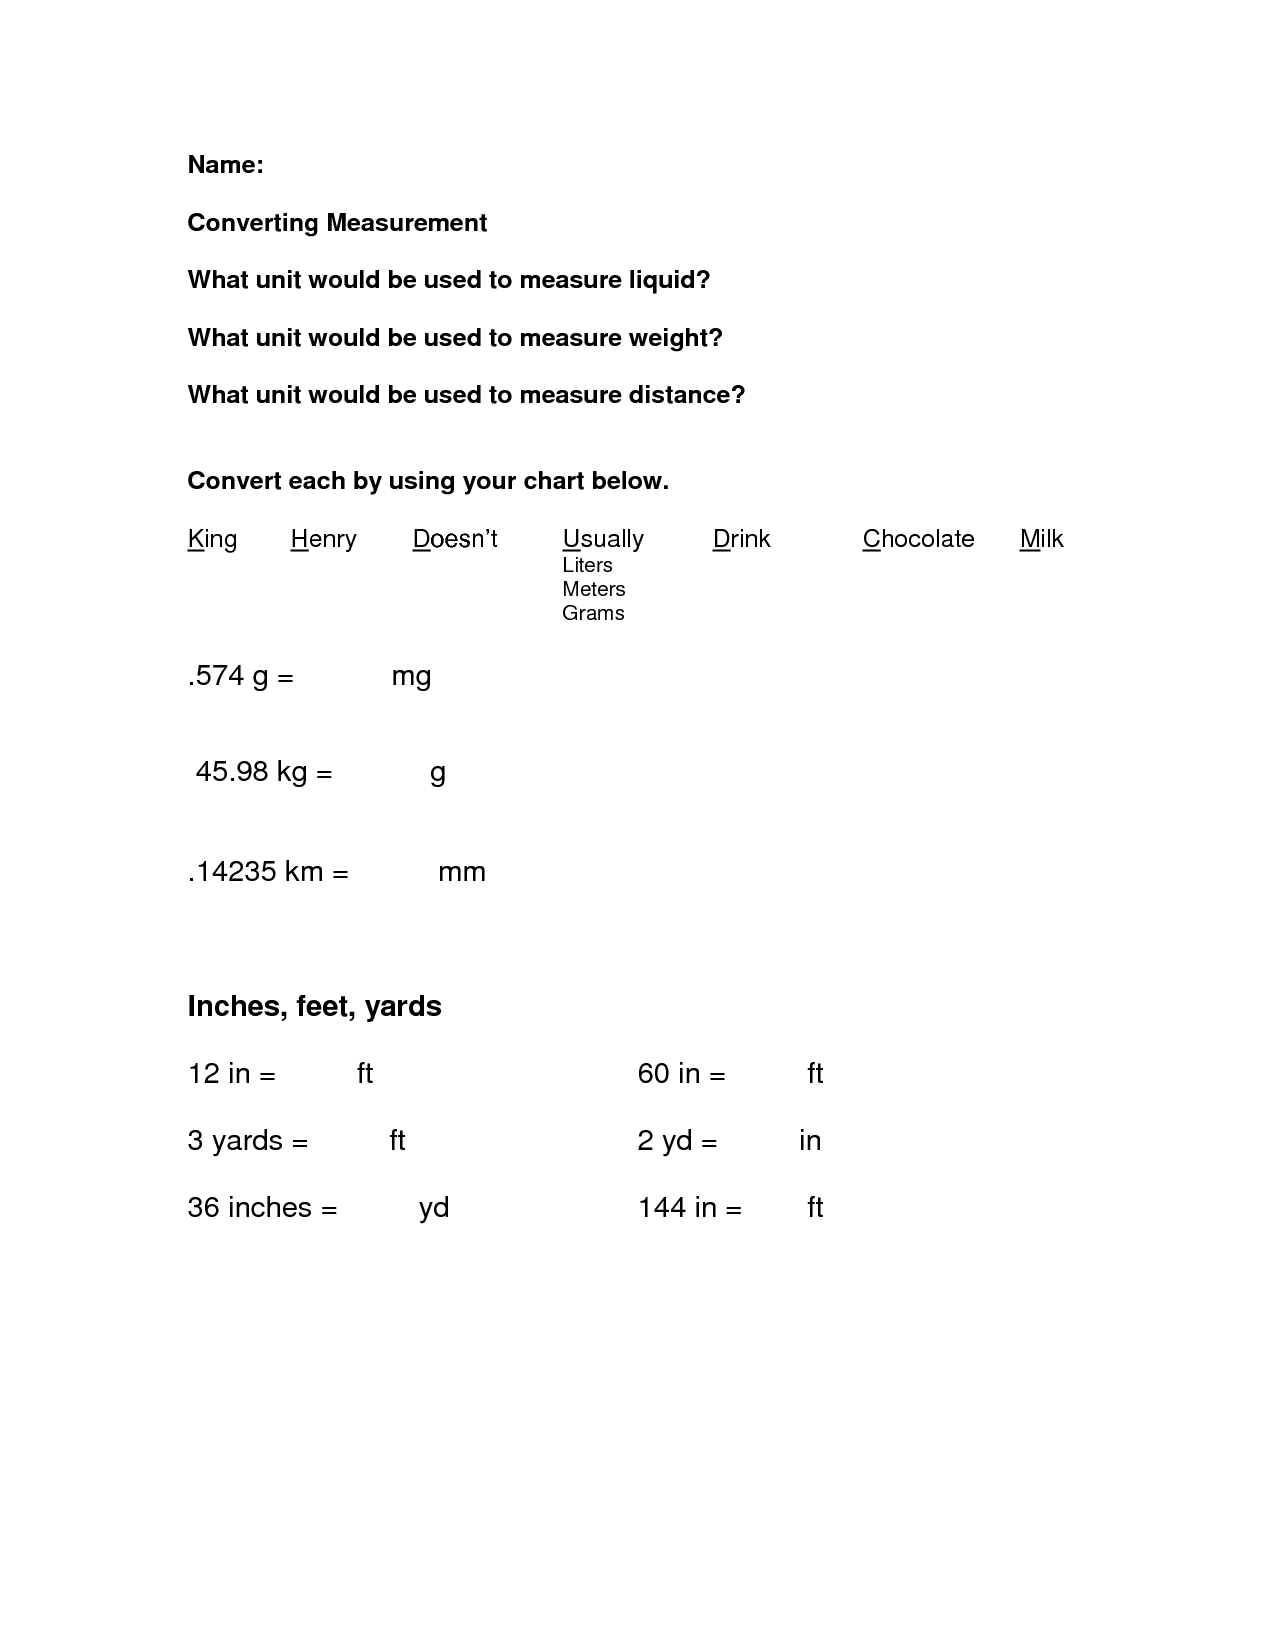 18-best-images-of-metric-system-worksheets-science-metric-system-conversion-chart-for-grams